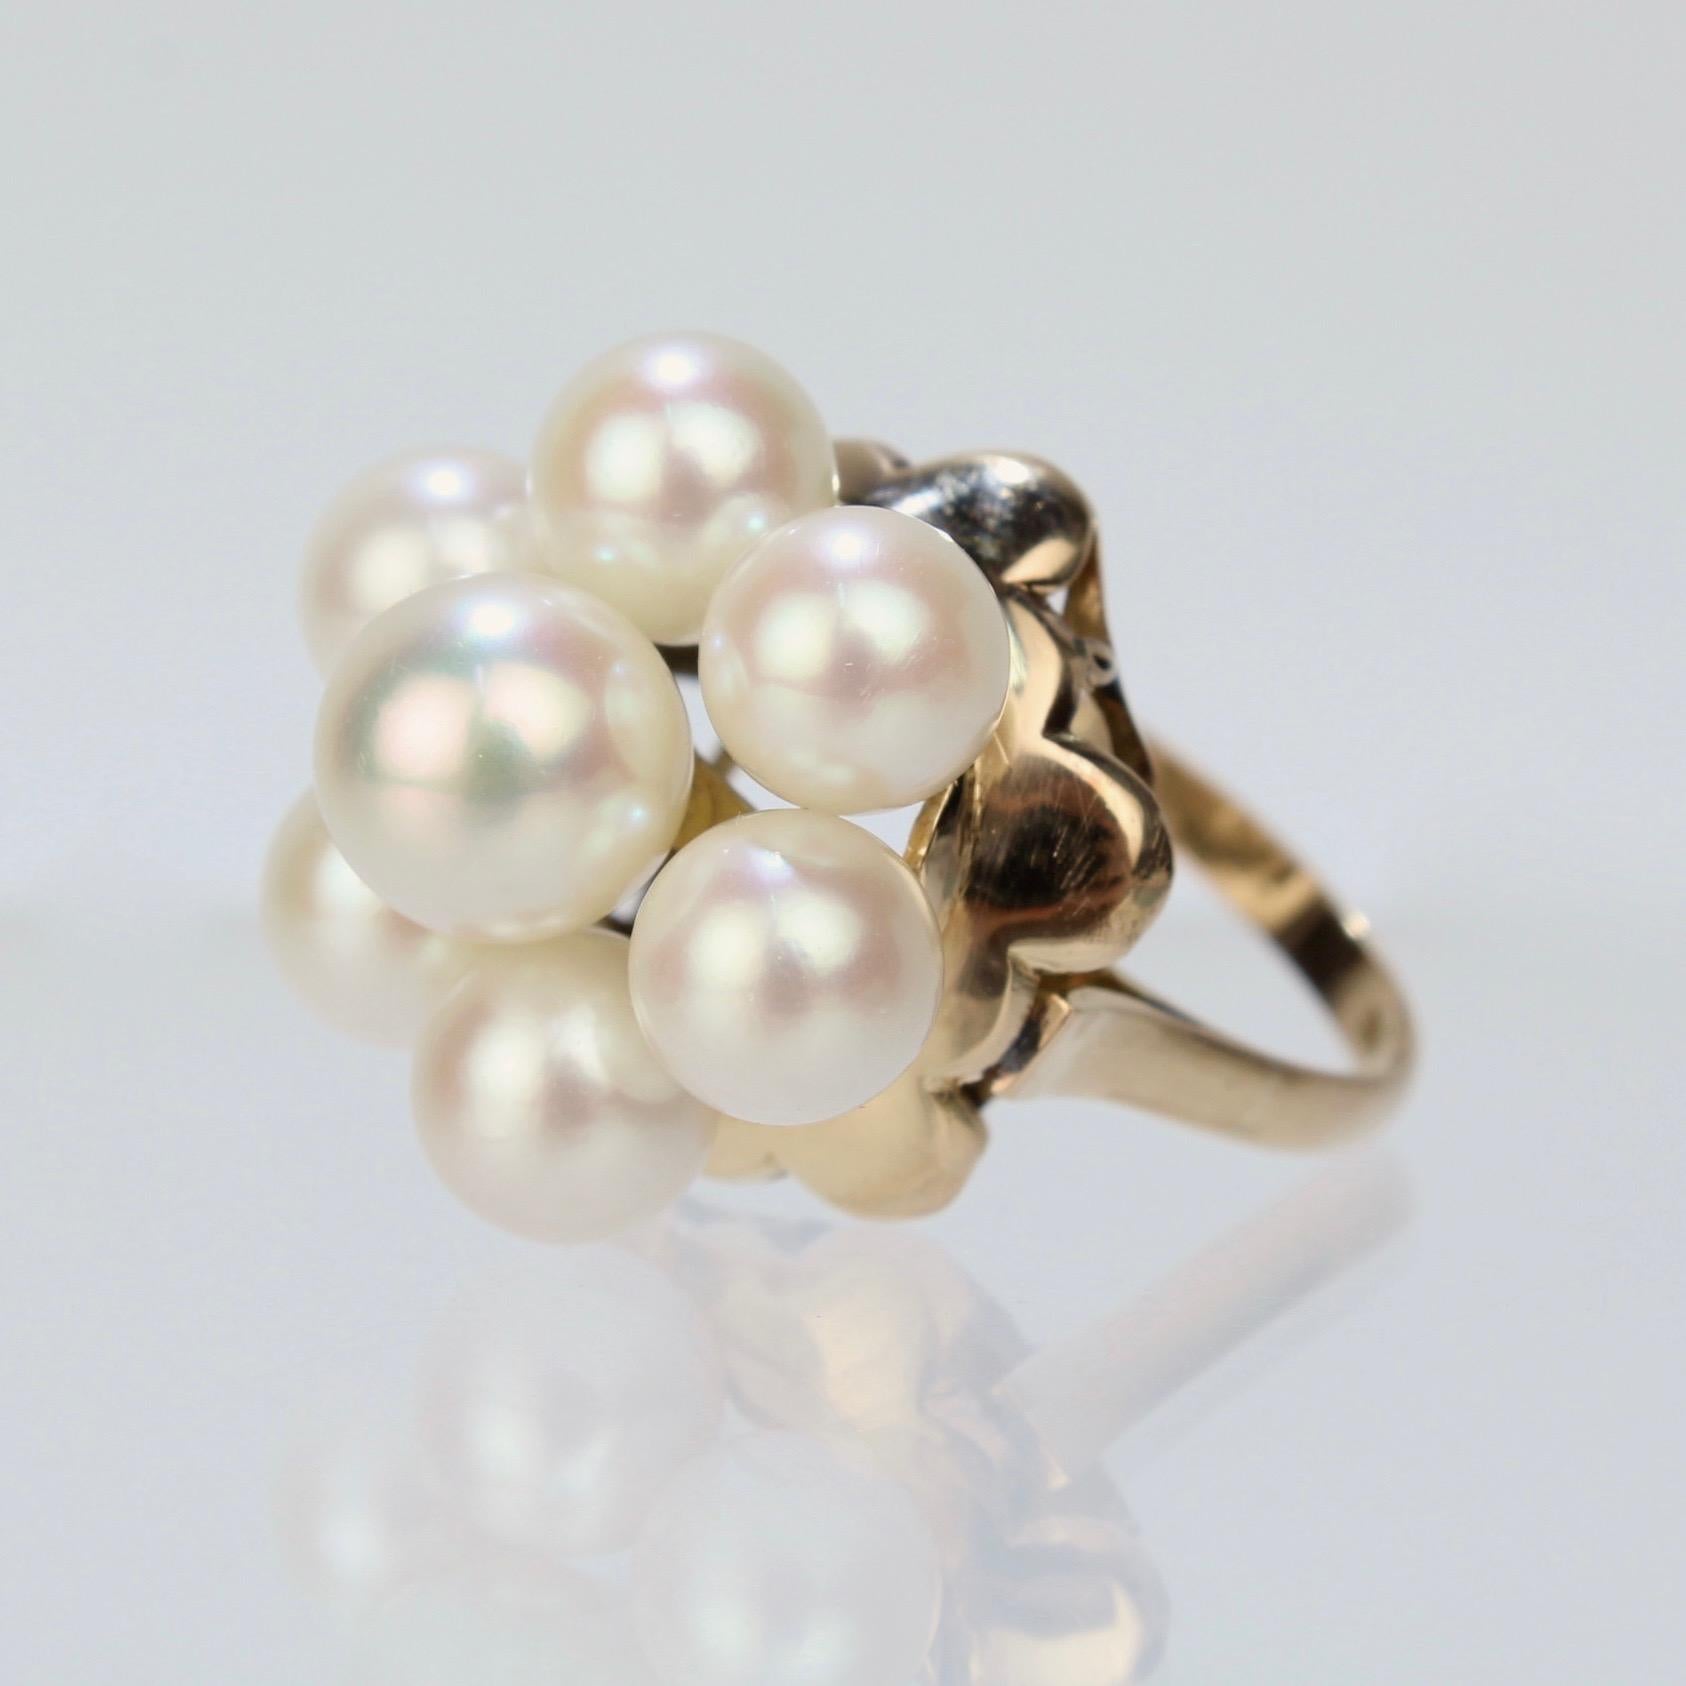 Modern Antique 18 Karat Gold and Pearl Cluster Midcentury Cocktail Ring